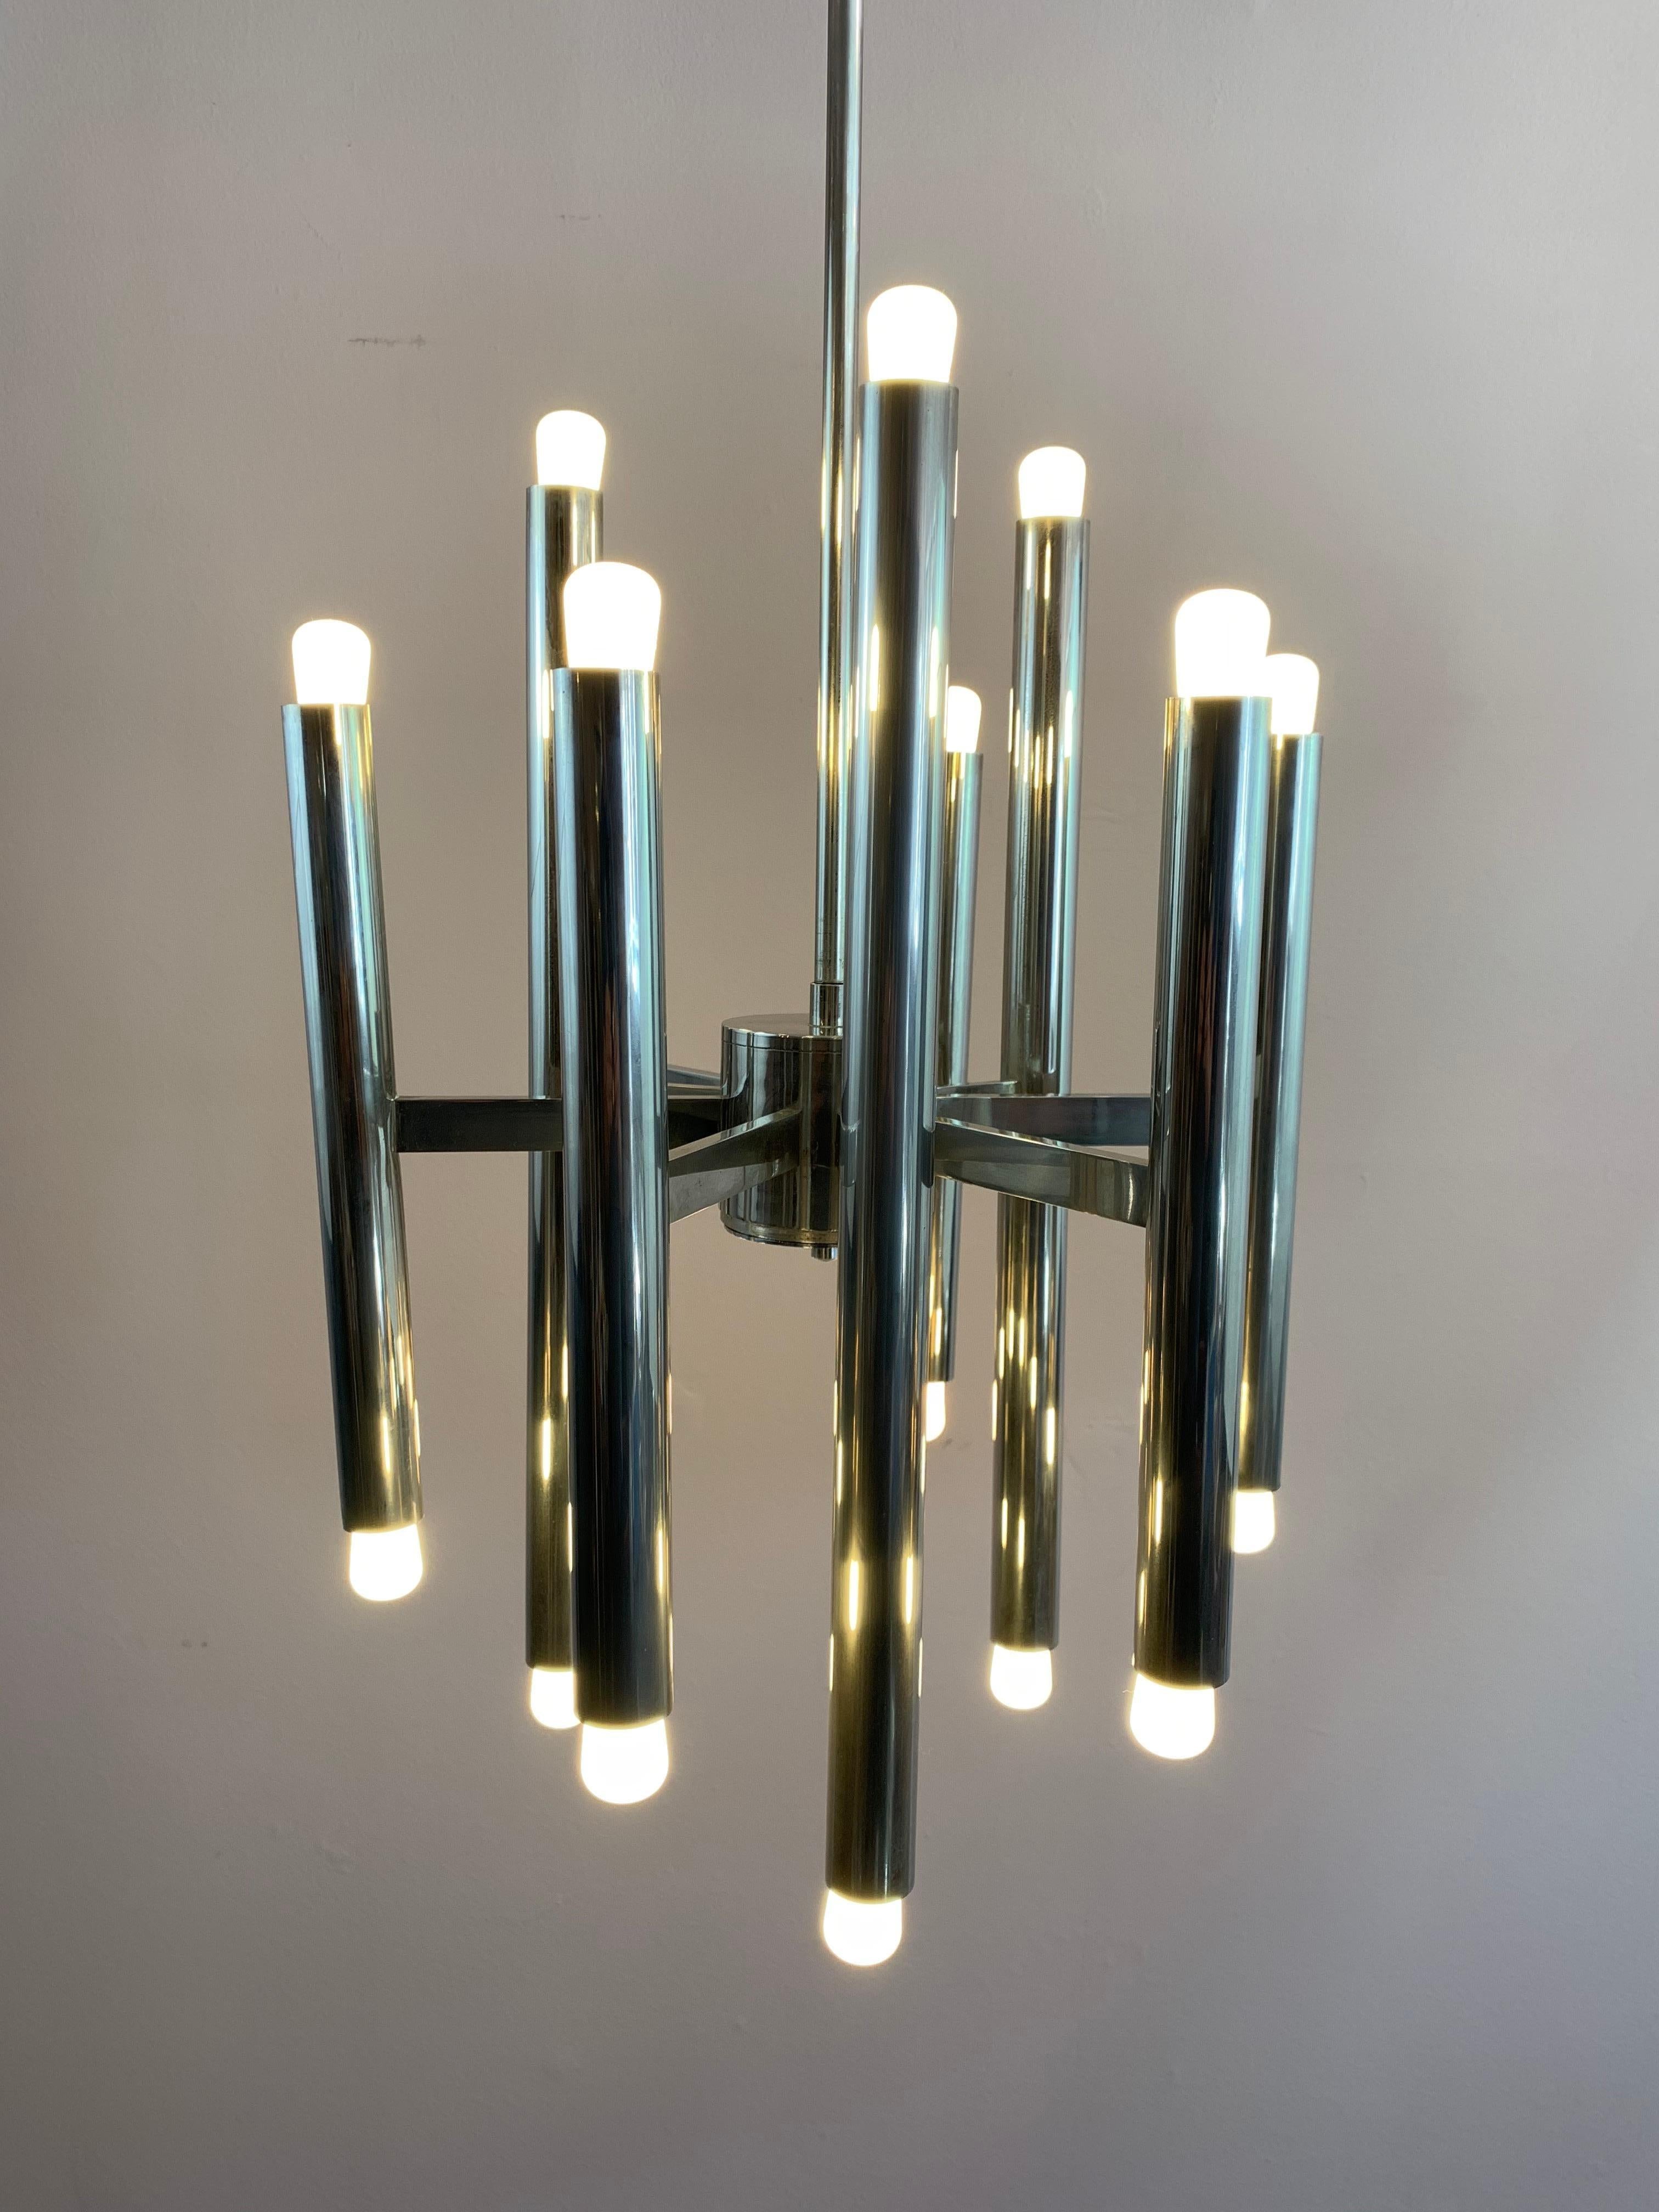 A striking 1970s brushed chrome tubular nine-arm hanging light designed by Gaetano Sciolari for Boulanger. 18 E17 screw-in bulbs are required for the light. One bulb at the top and bottom of each tube. The height is adjustable by either shortening